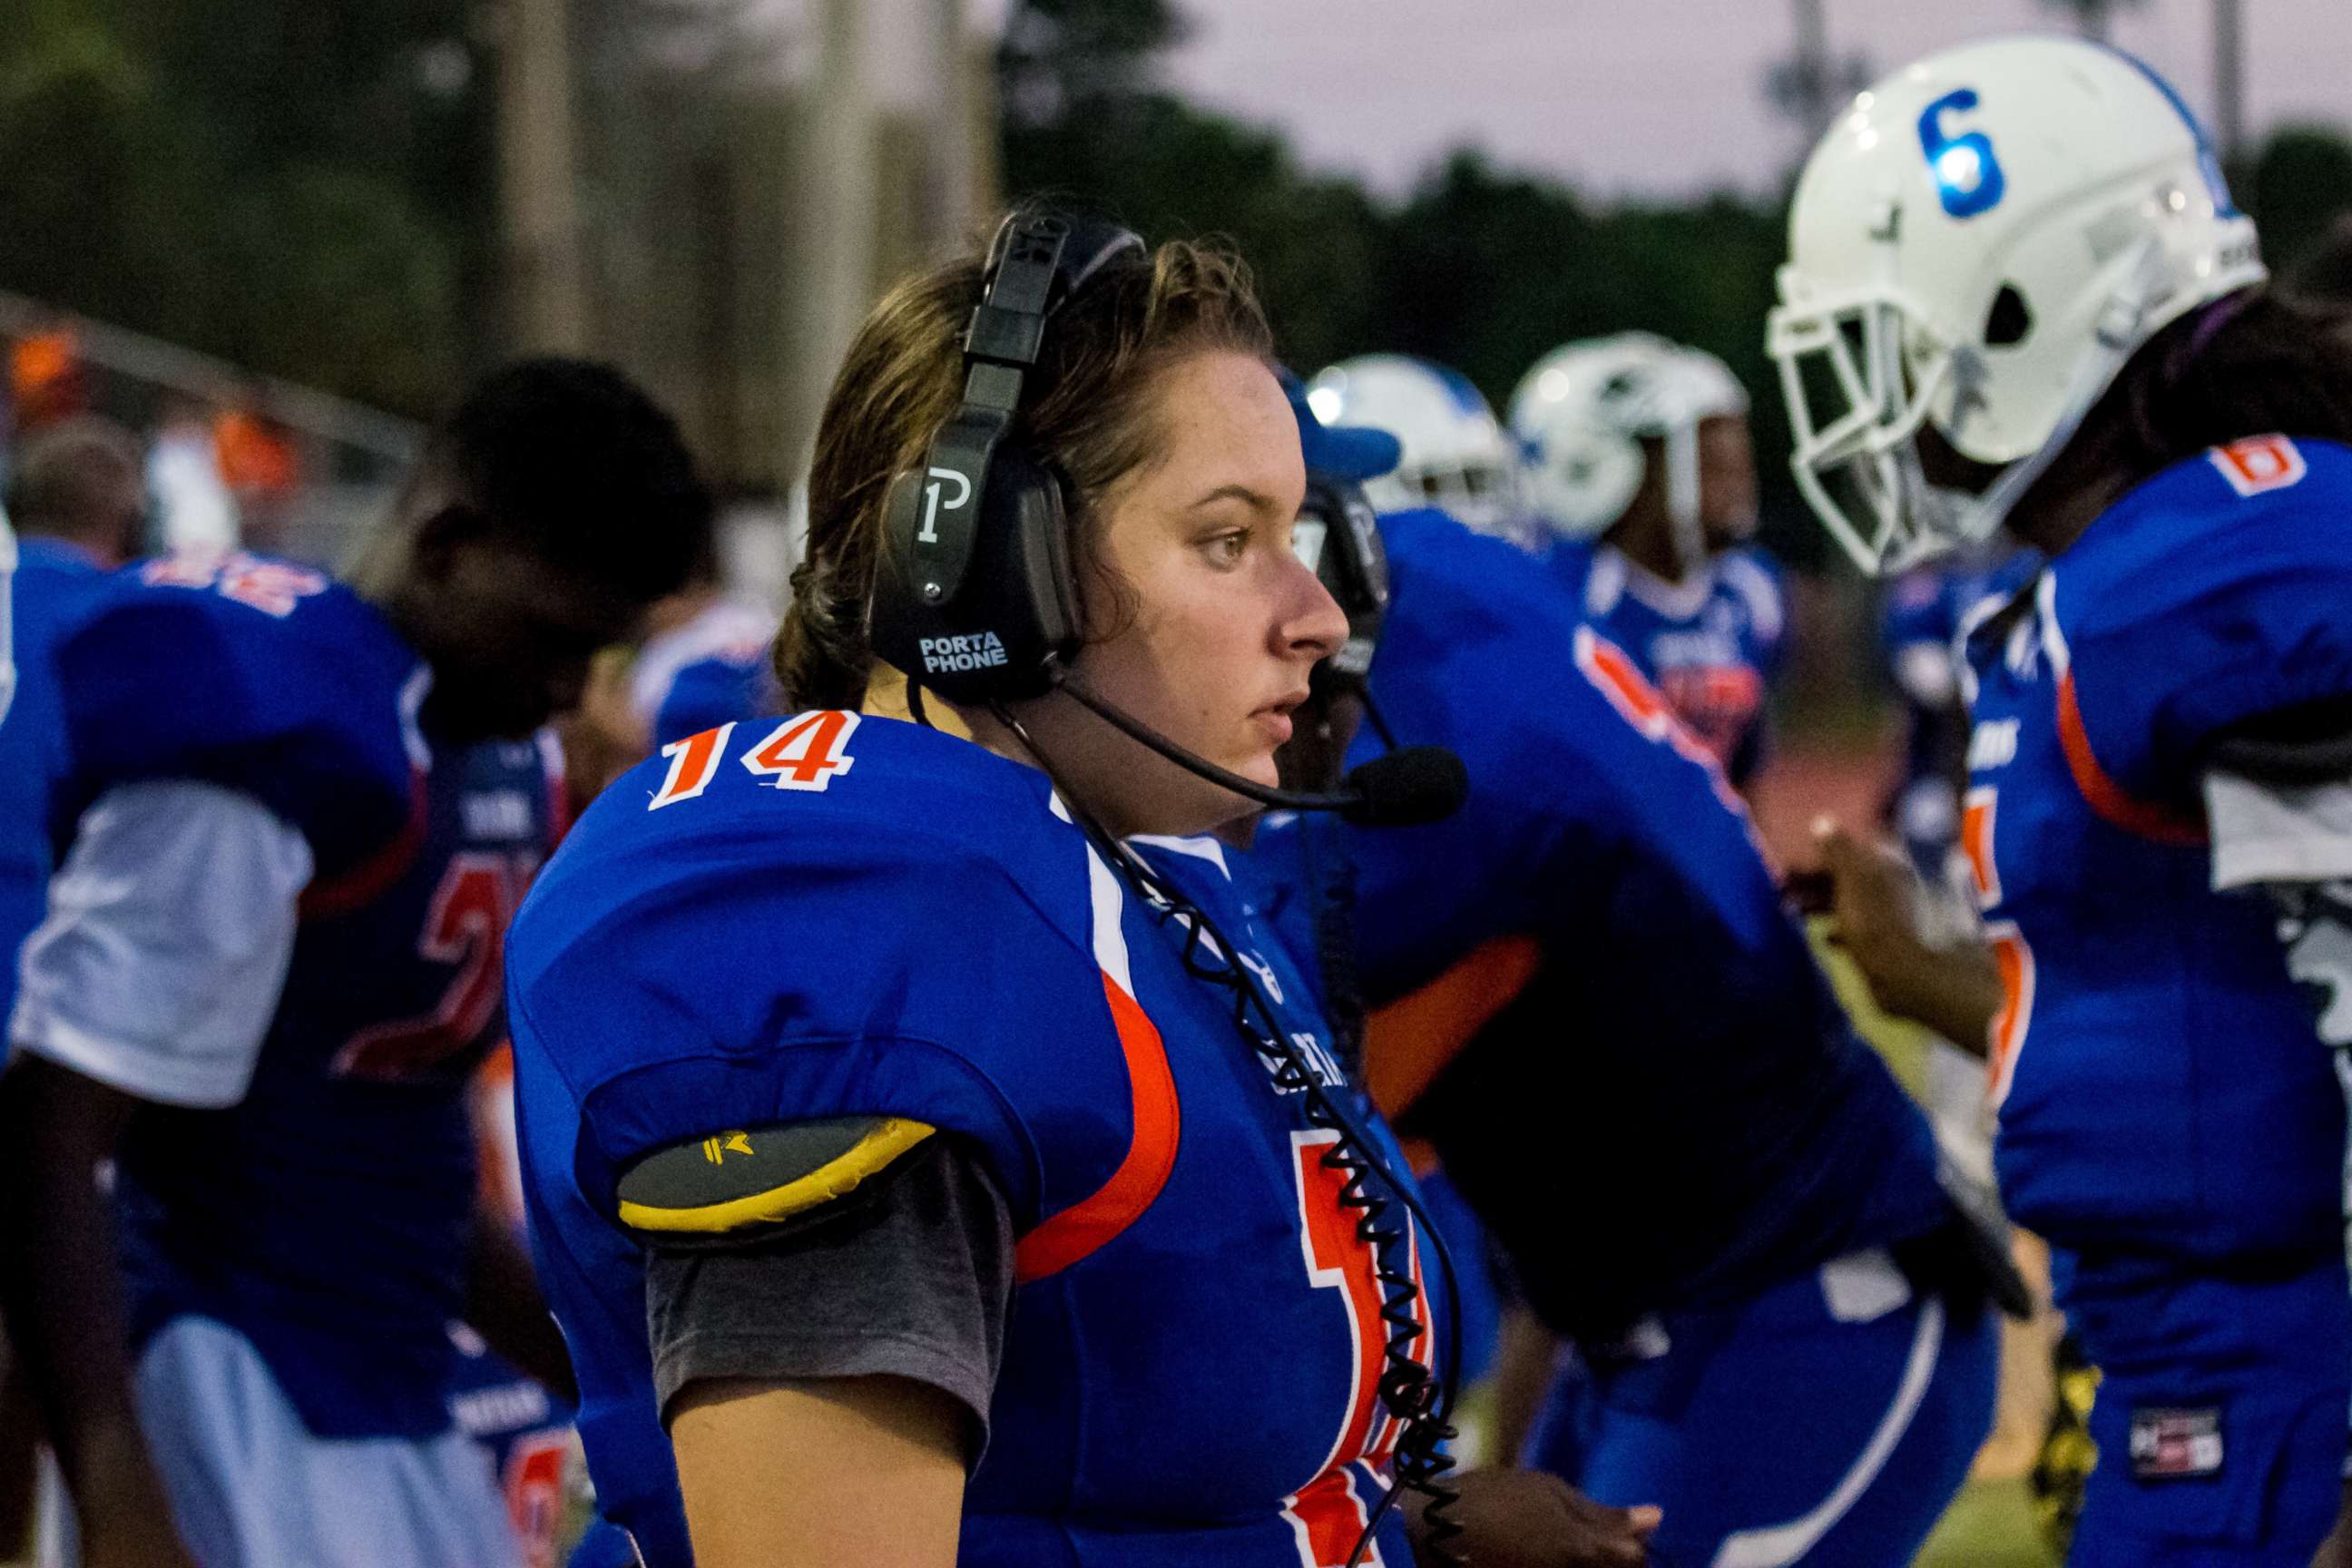 PHOTO: Holly Neher, 16, made history in the state of Florida when she started as quarterback for her Hollywood Hills High School varsity football team.